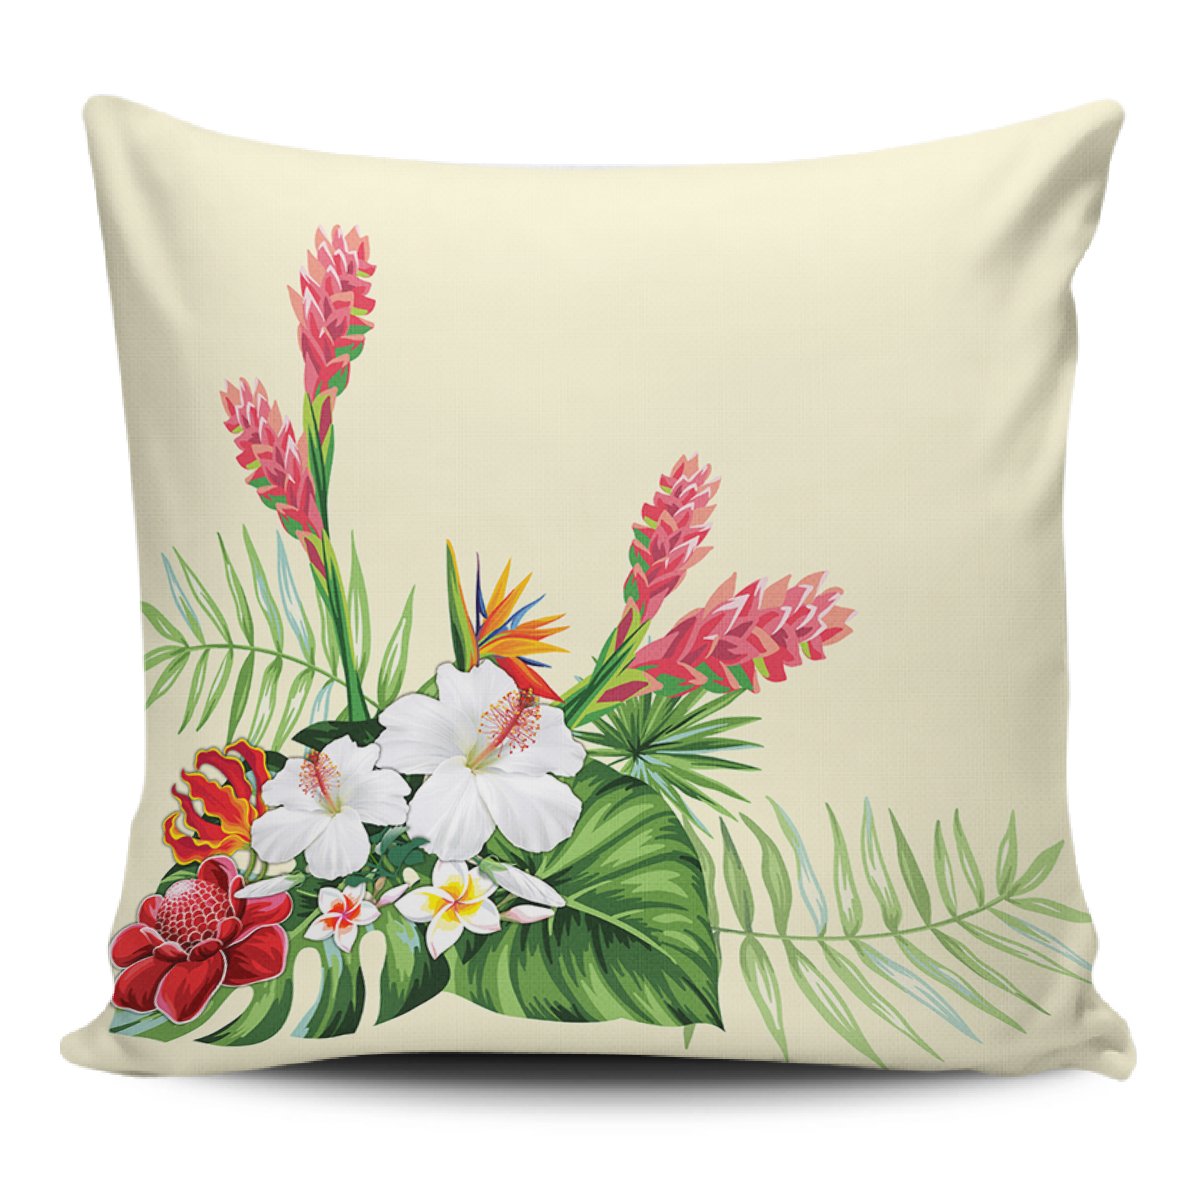 Wonderful Hibiscus Flower Pillow Covers One Size Zippered Pillow Case 18"x18"(Twin Sides) Black - Polynesian Pride